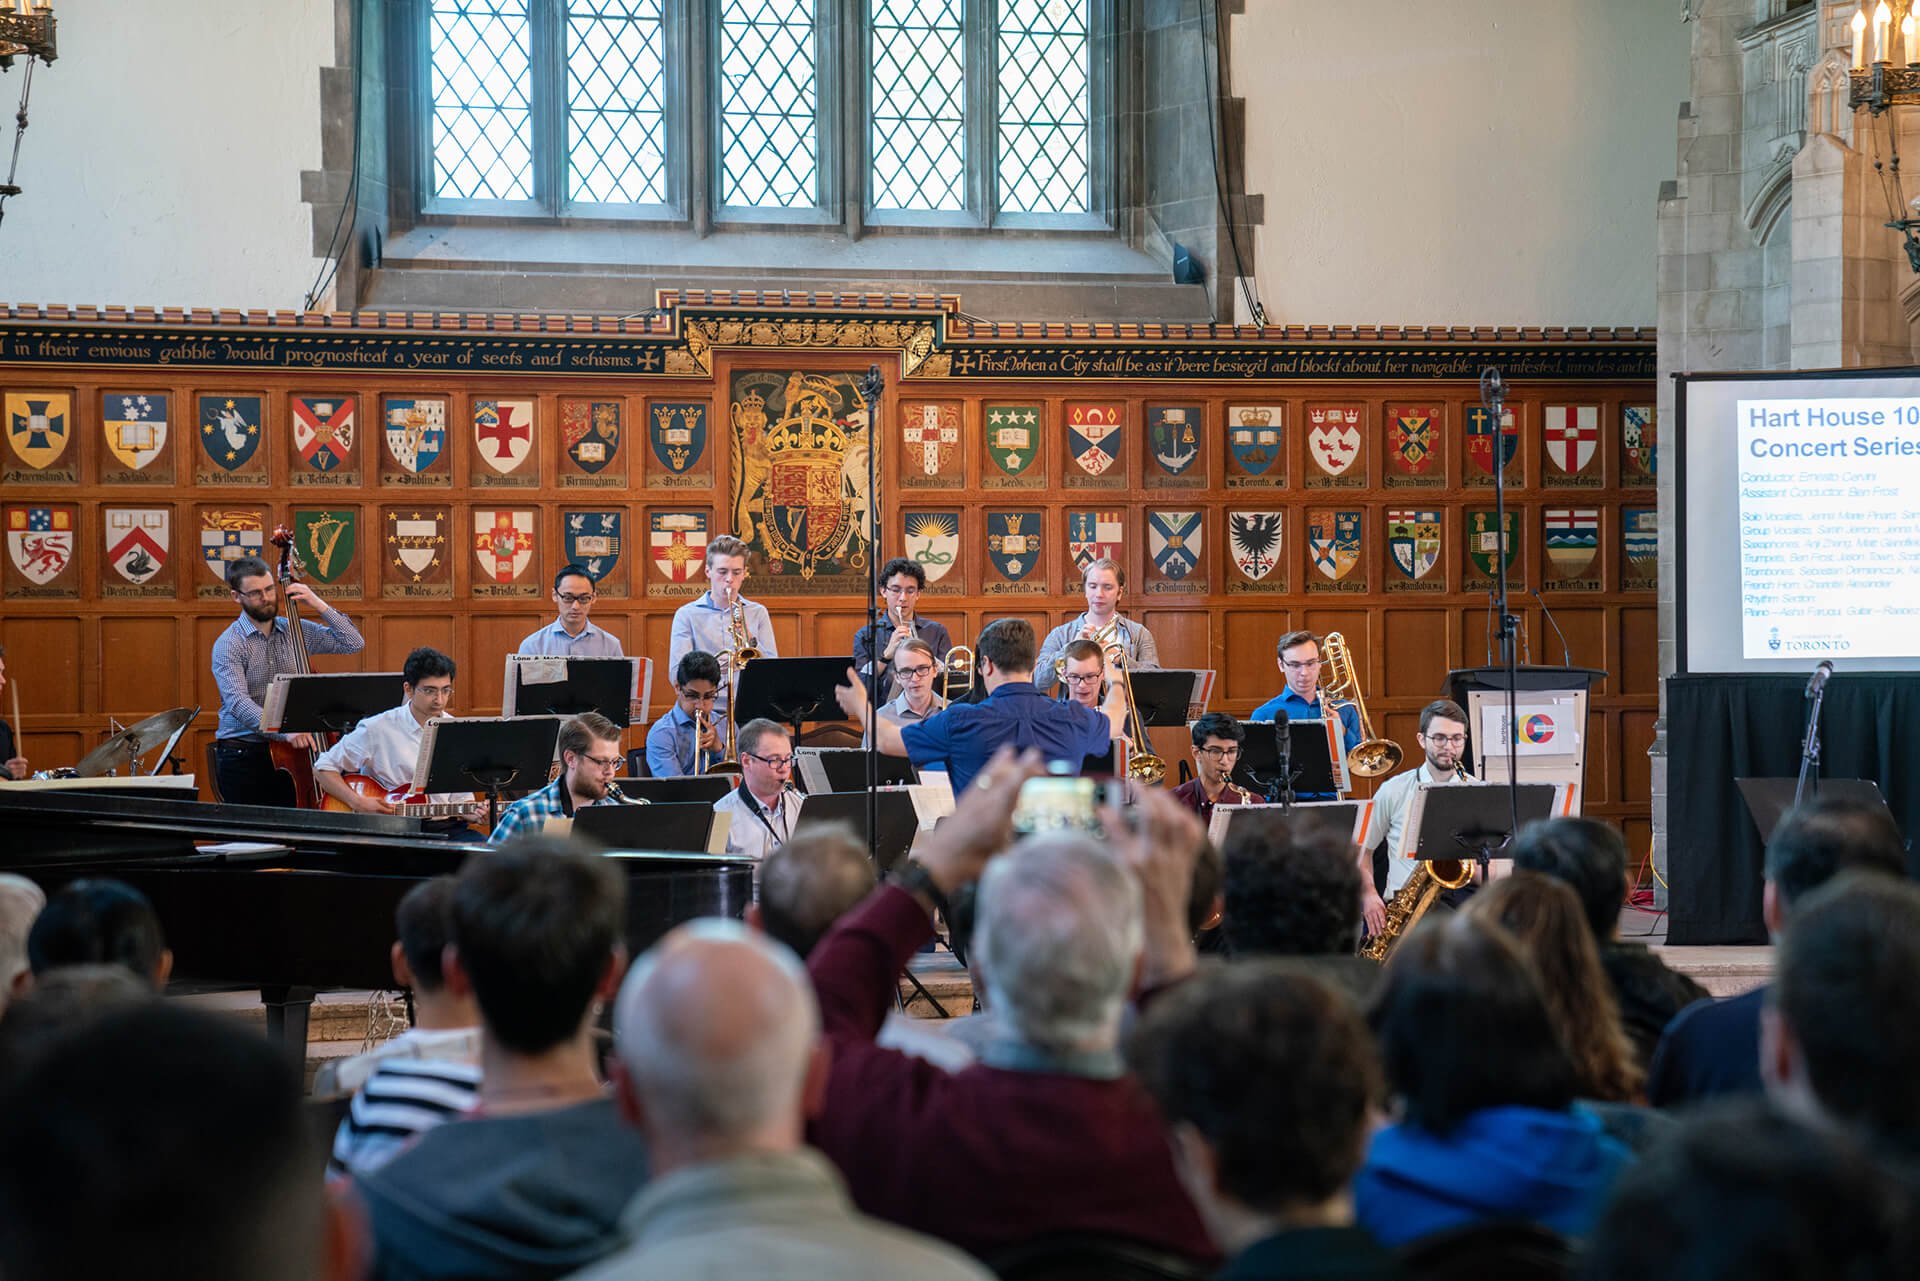 Band sitting and playing their musical instruments for sitting audience and a conductor standing conducting the band a large collection of of heraldry shields displays on the wall behind them